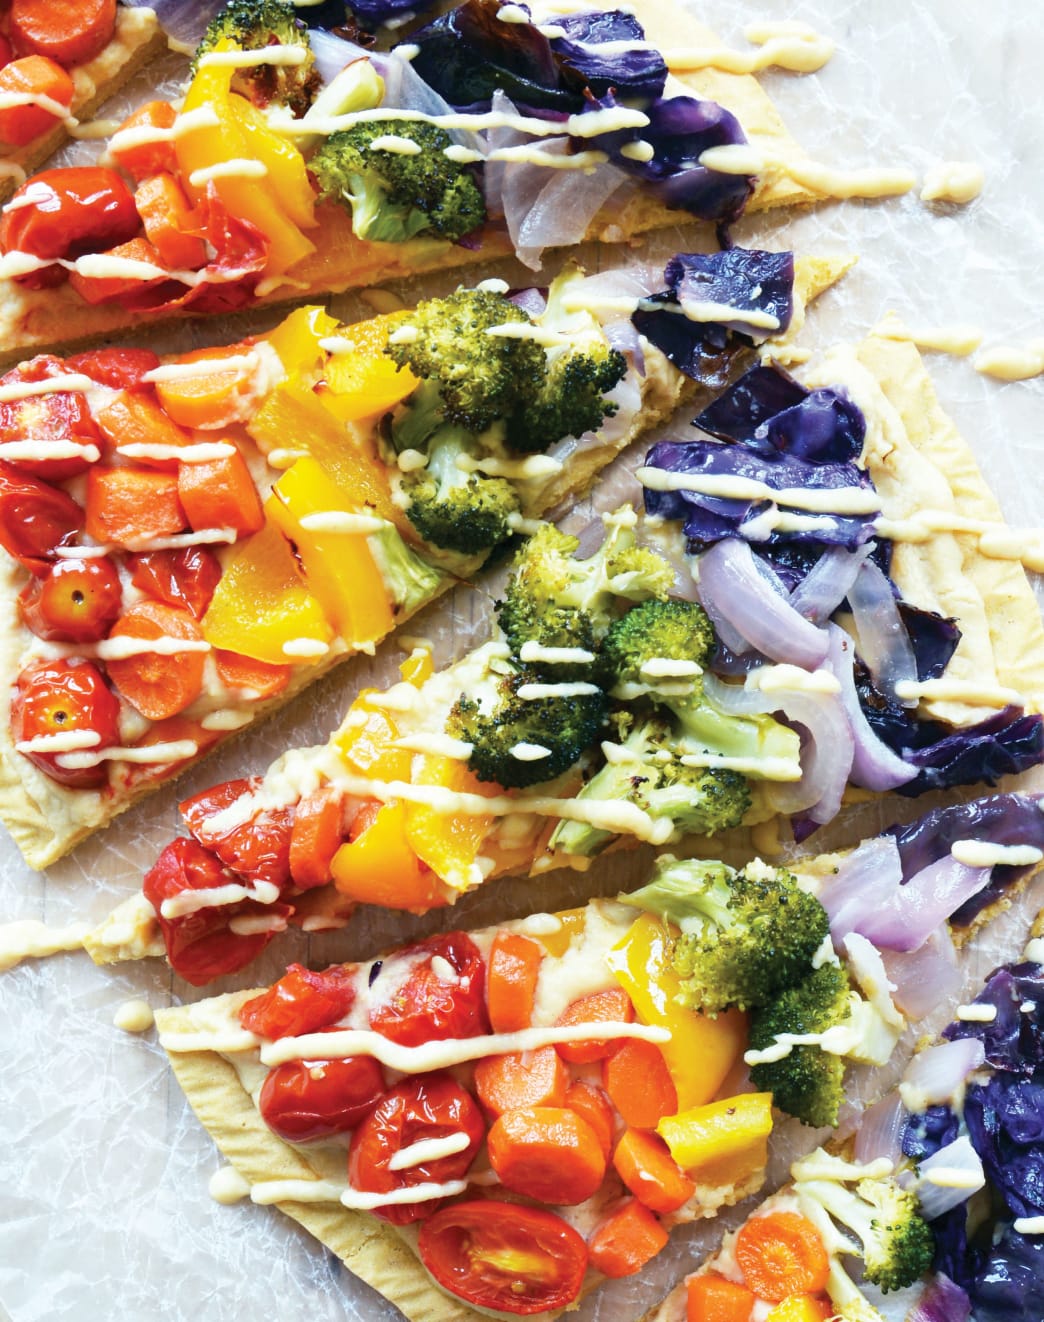 The 10 most COLORFUL recipes that all your kids, nieces and nephews will ACTUALLY eat.